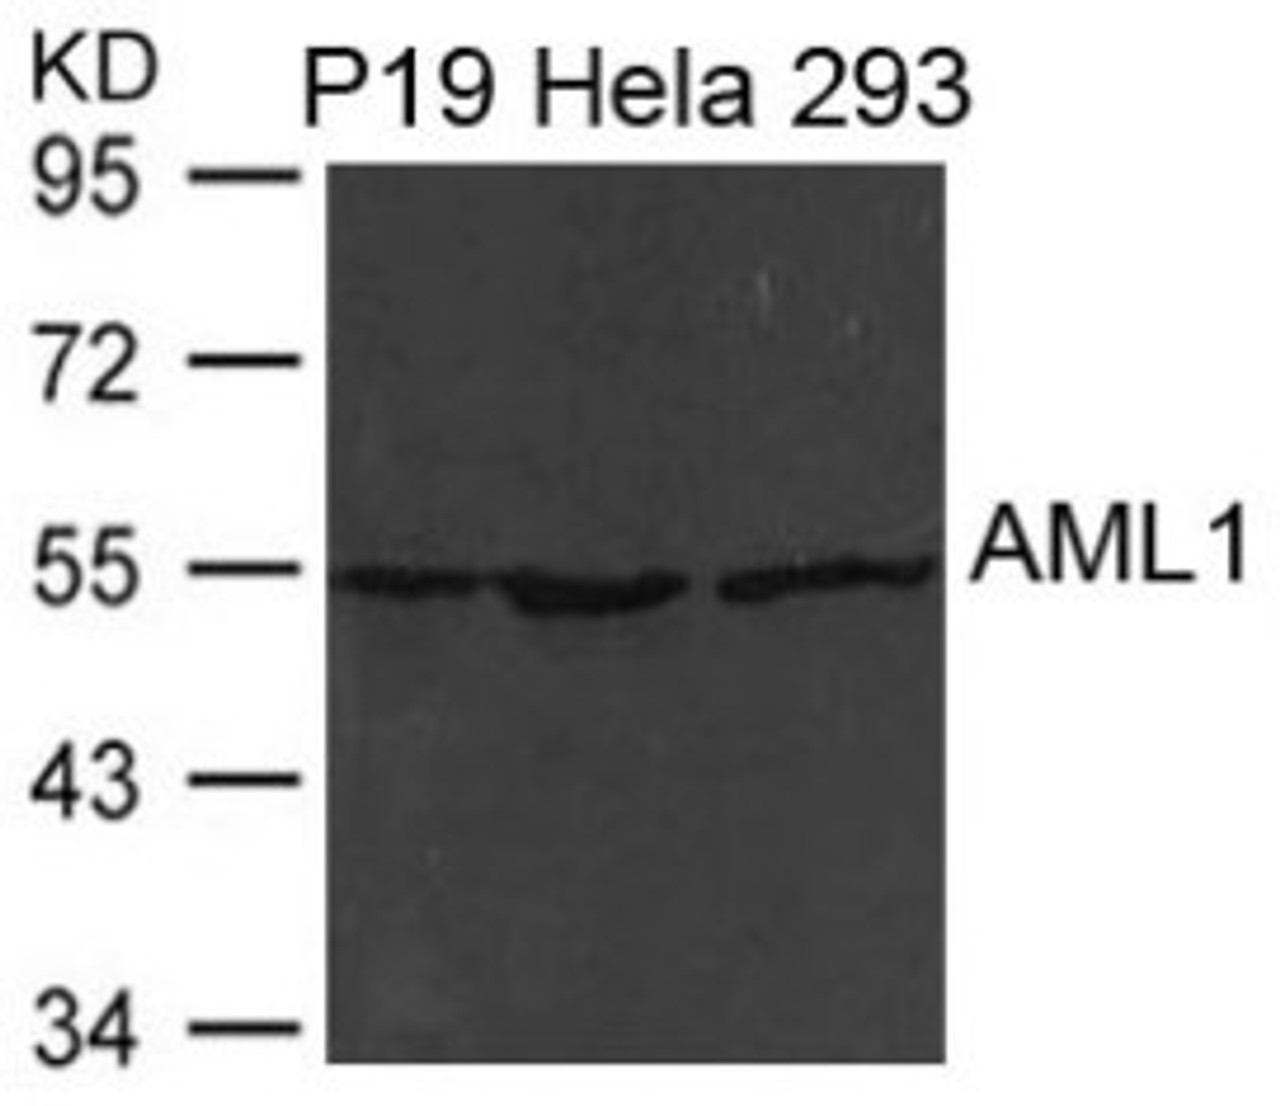 Western blot analysis of extract from P19, HeLa and 293 cells using AML1 (RUNX1) .